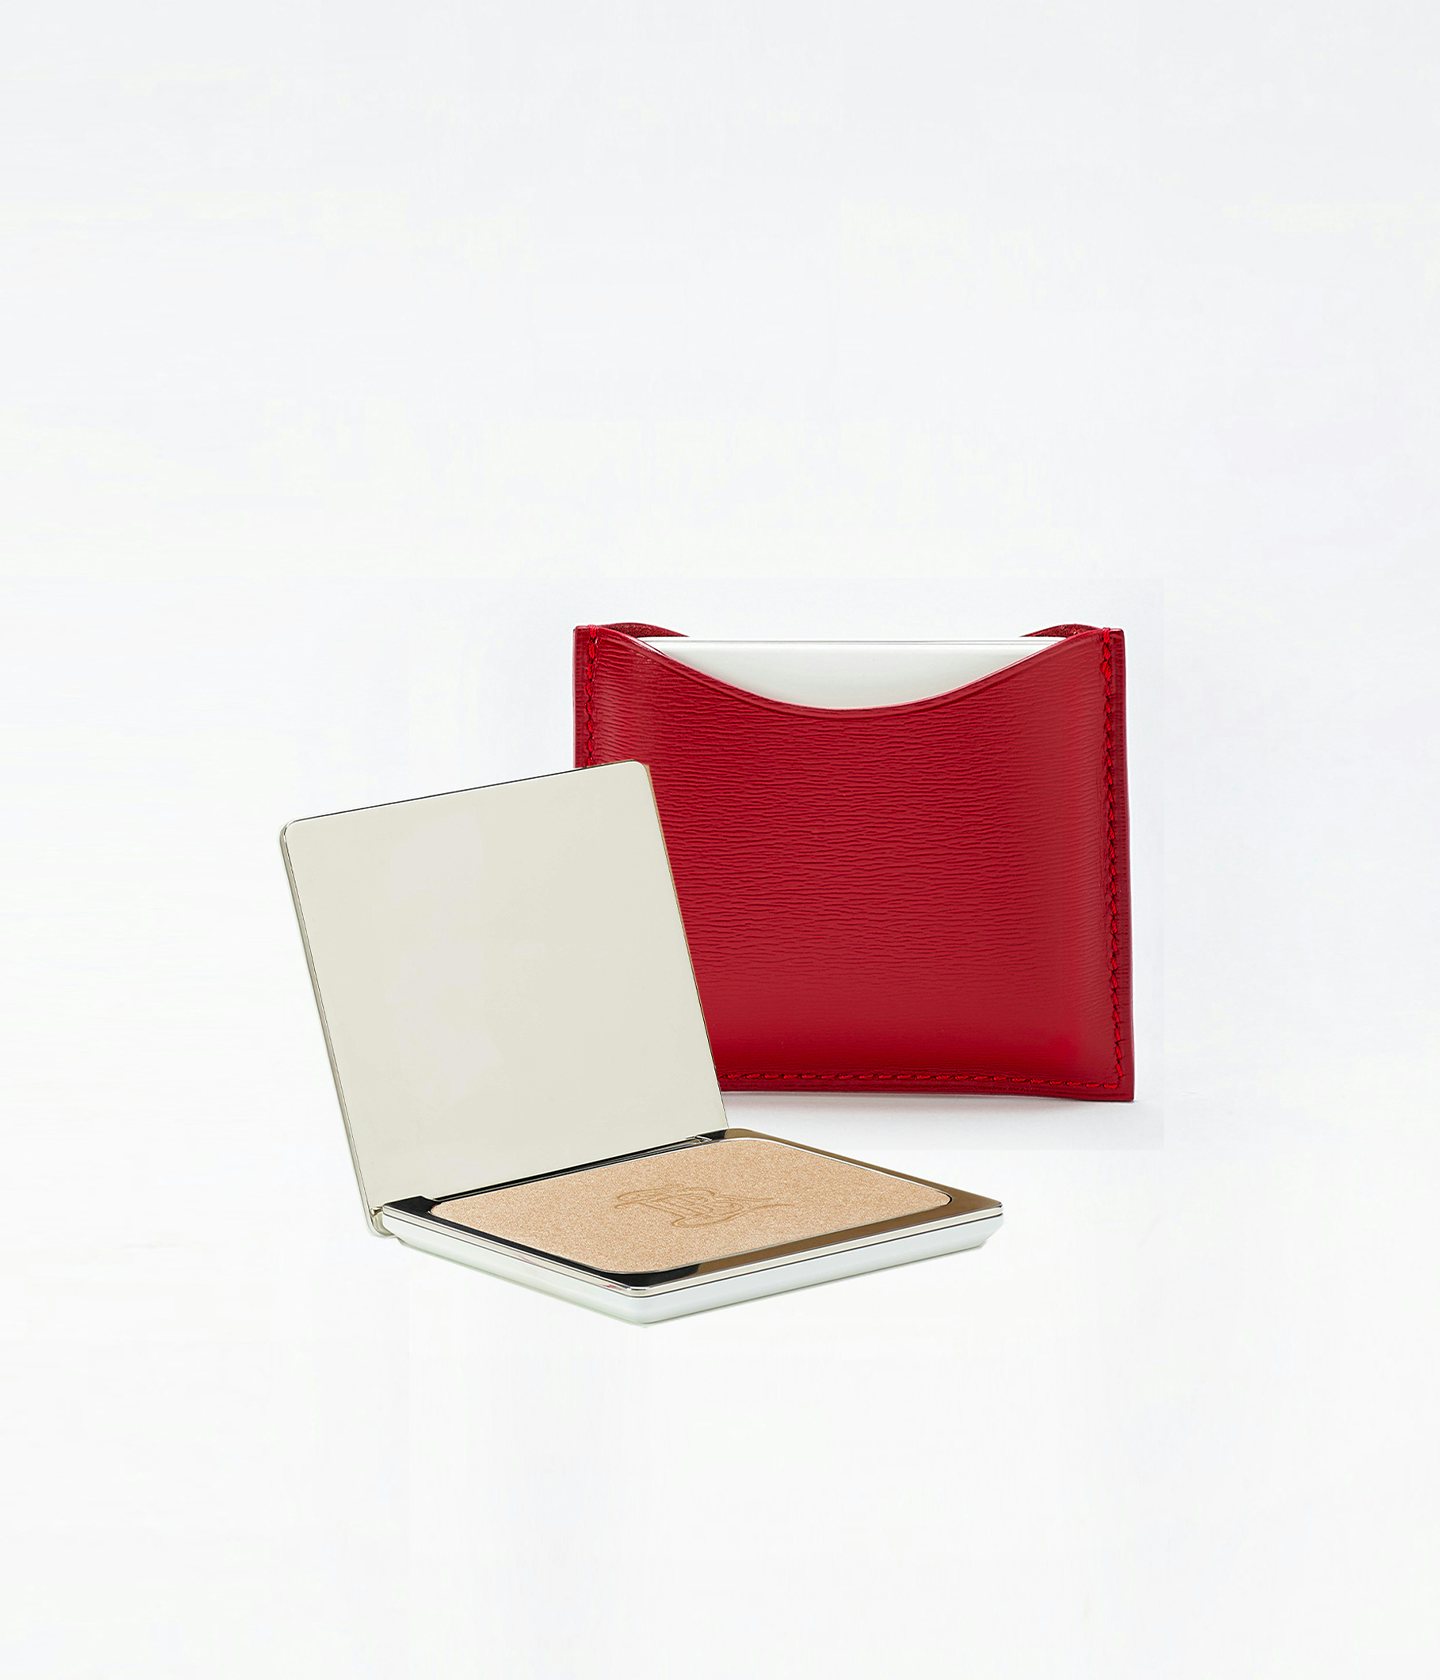 La bouche rouge La Lumière Highlighter in the red leather compact case 